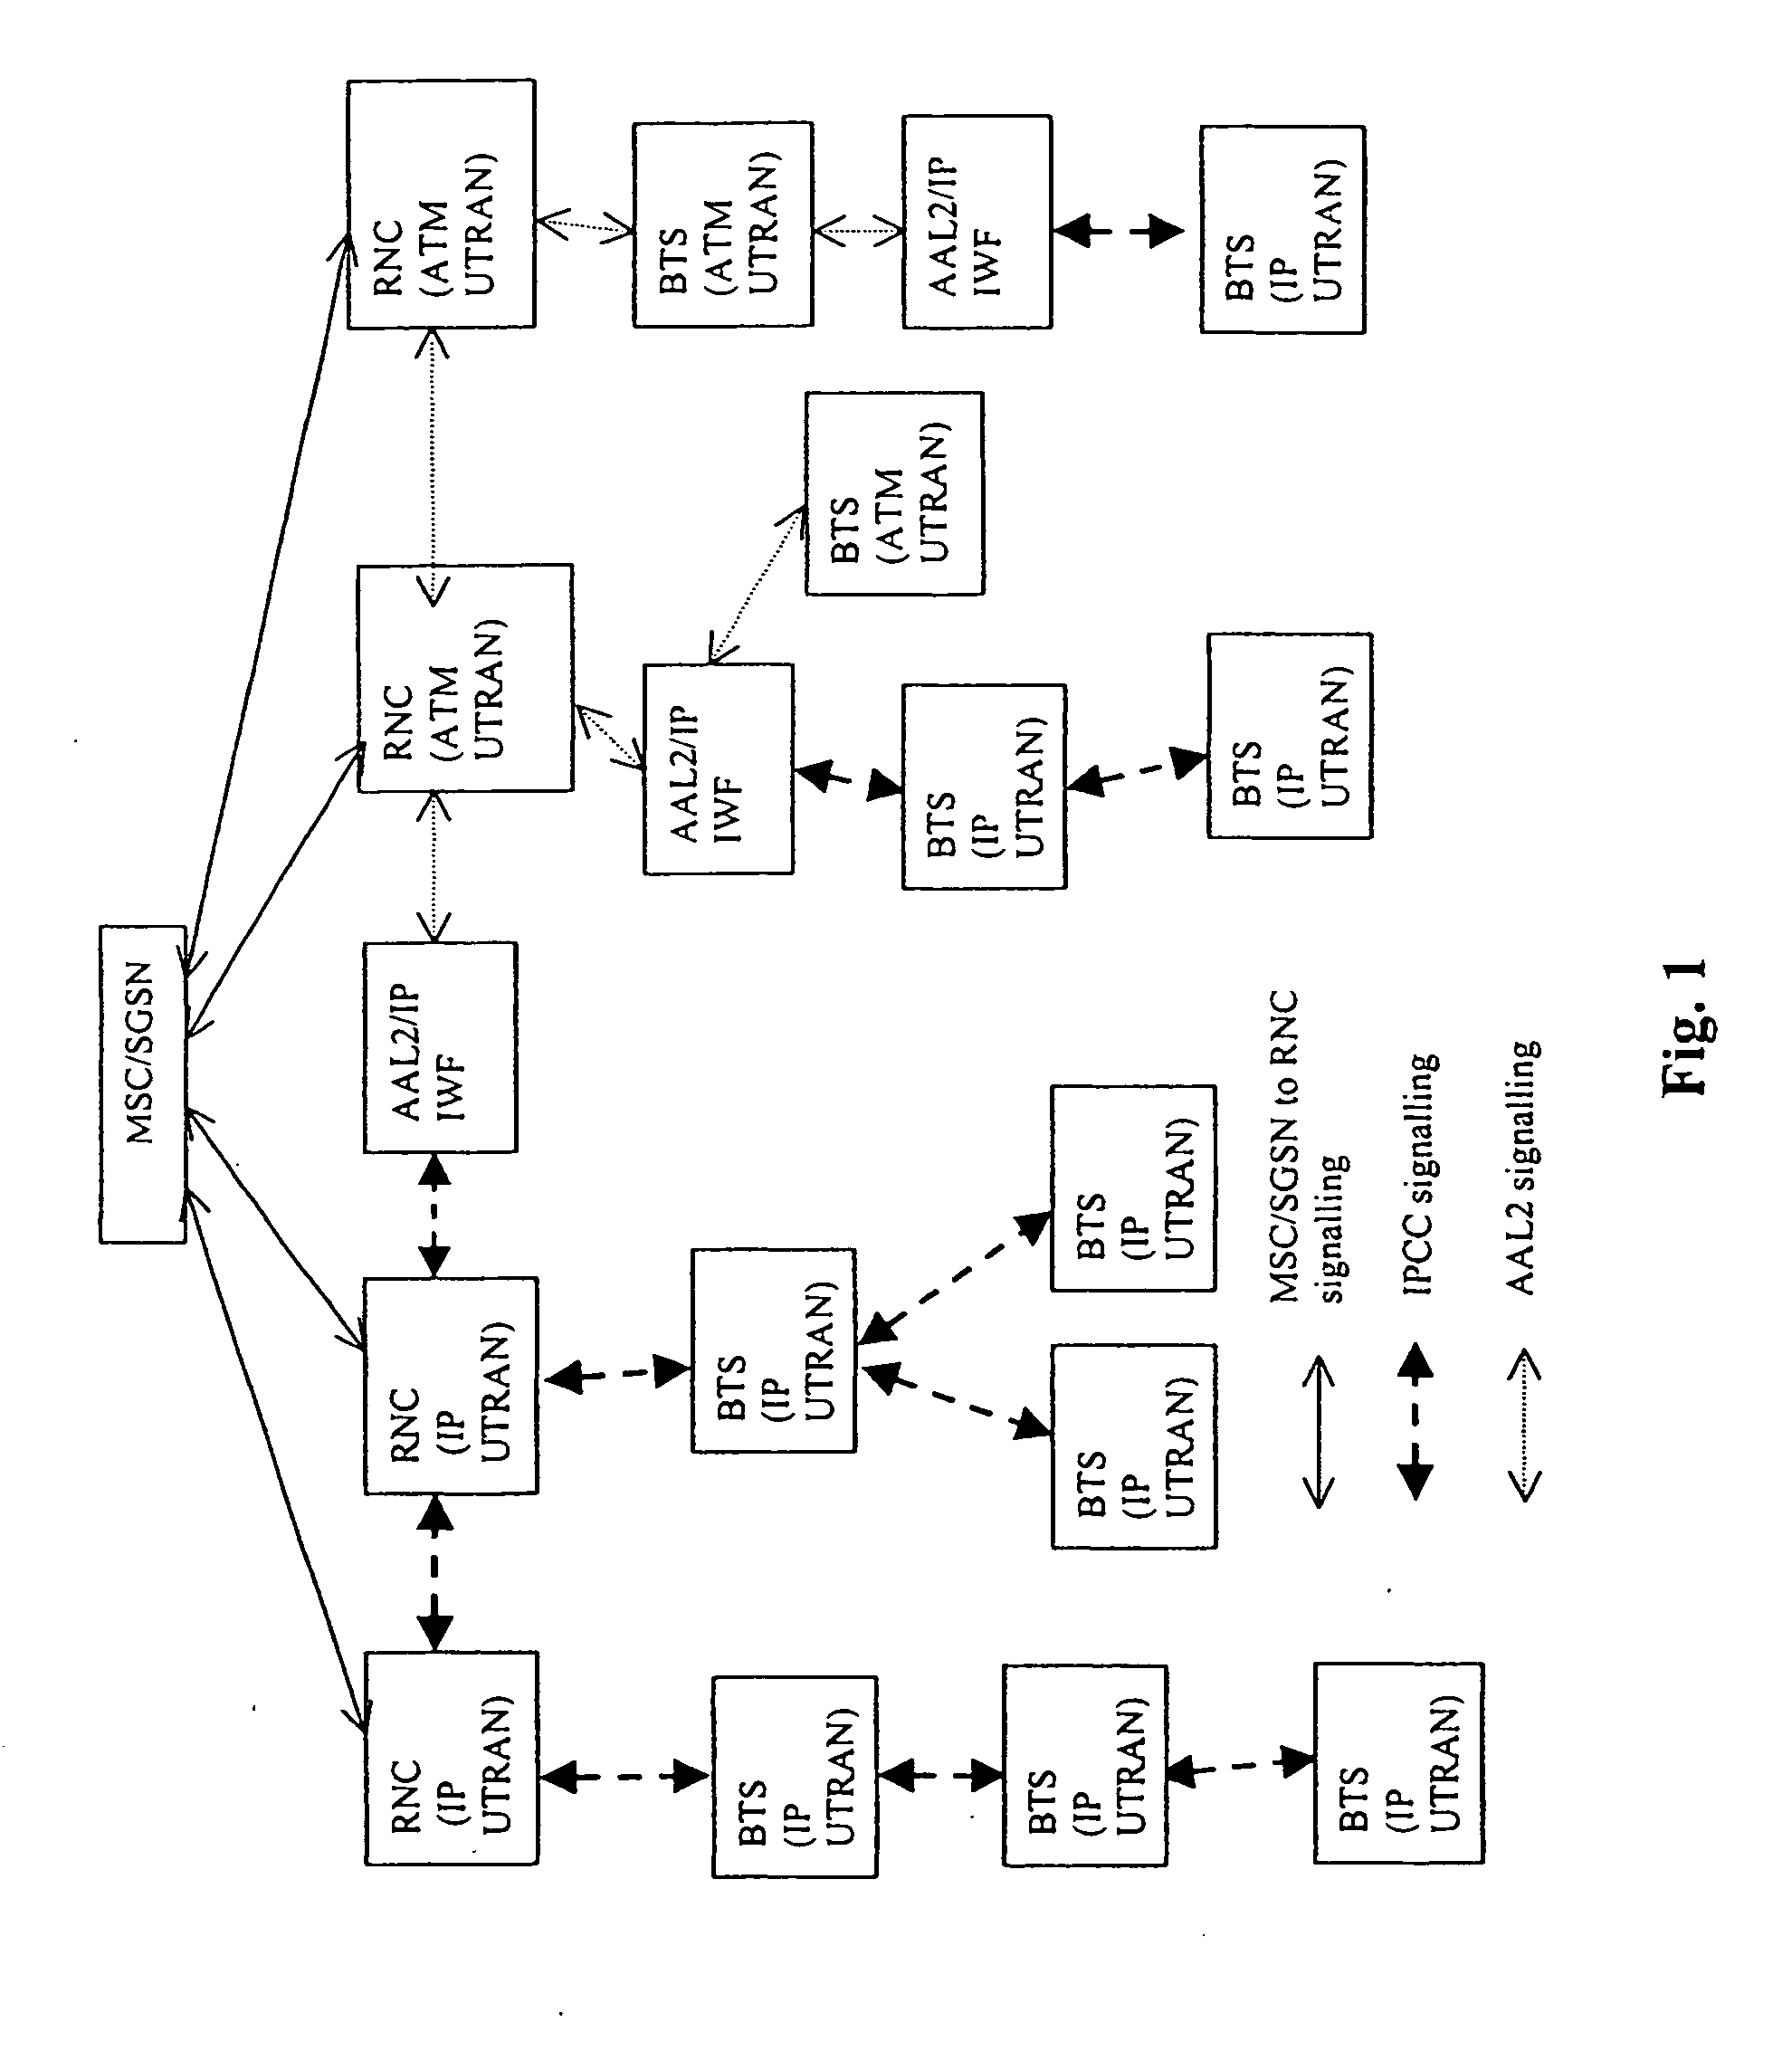 User datagram protocol packet processing on network elements